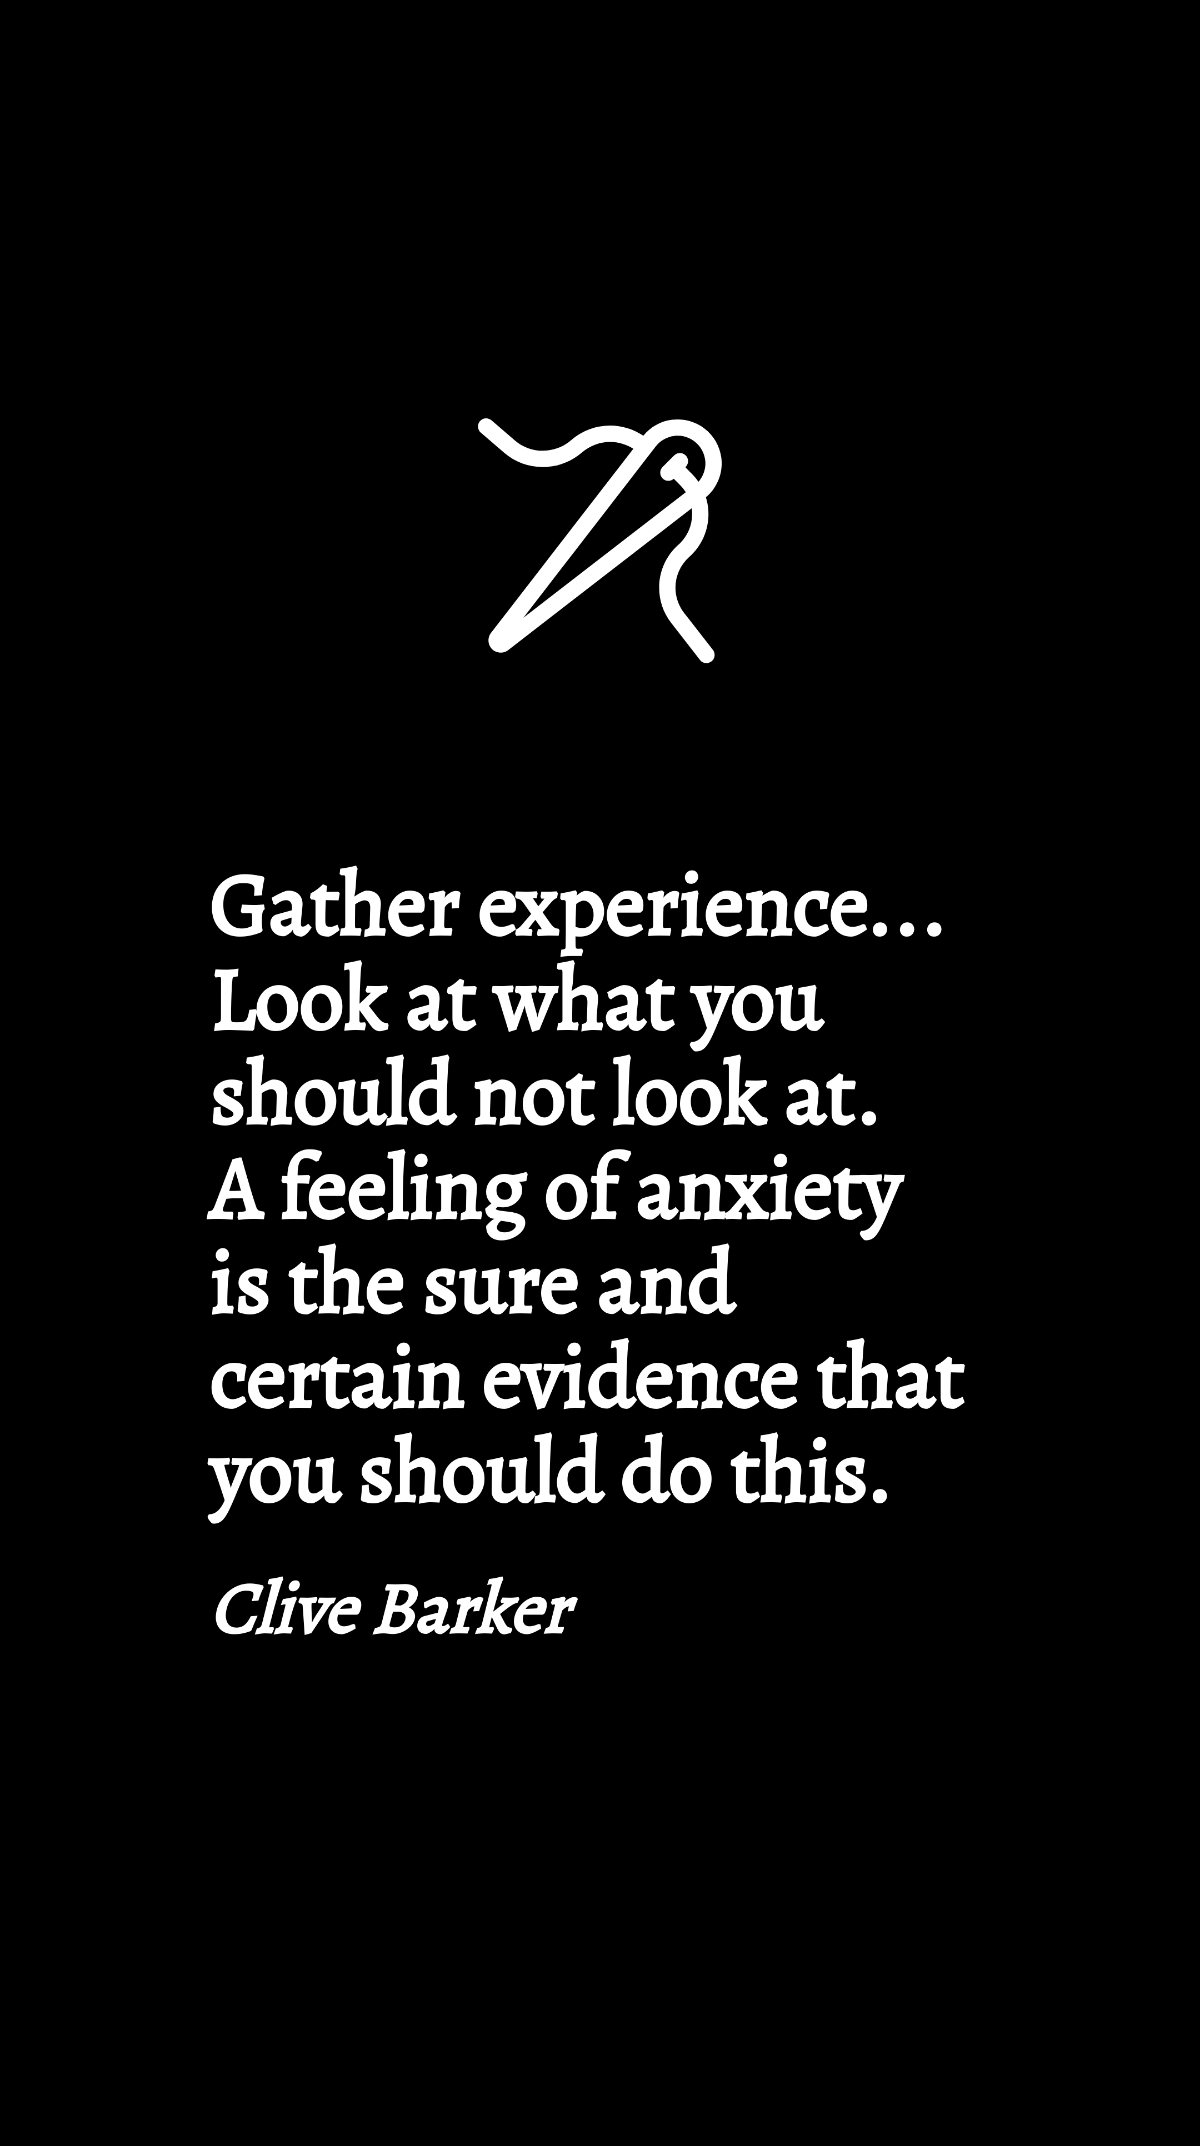 Clive Barker - Gather experience... Look at what you should not look at. A feeling of anxiety is the sure and certain evidence that you should do this.